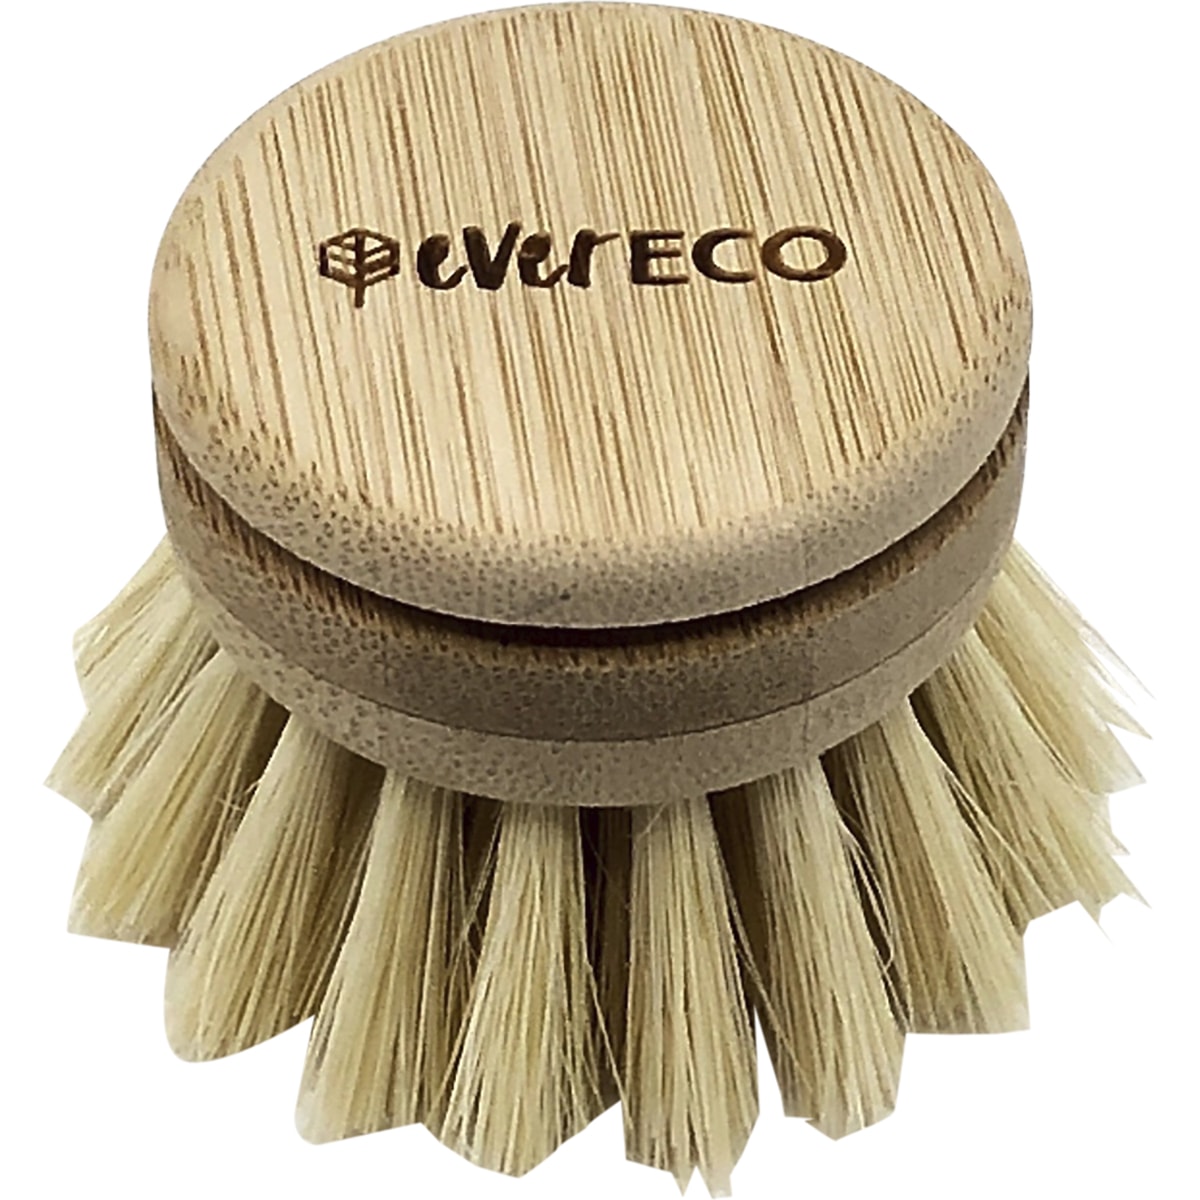 Ever Eco bamboo and sisal replacement dish brush head